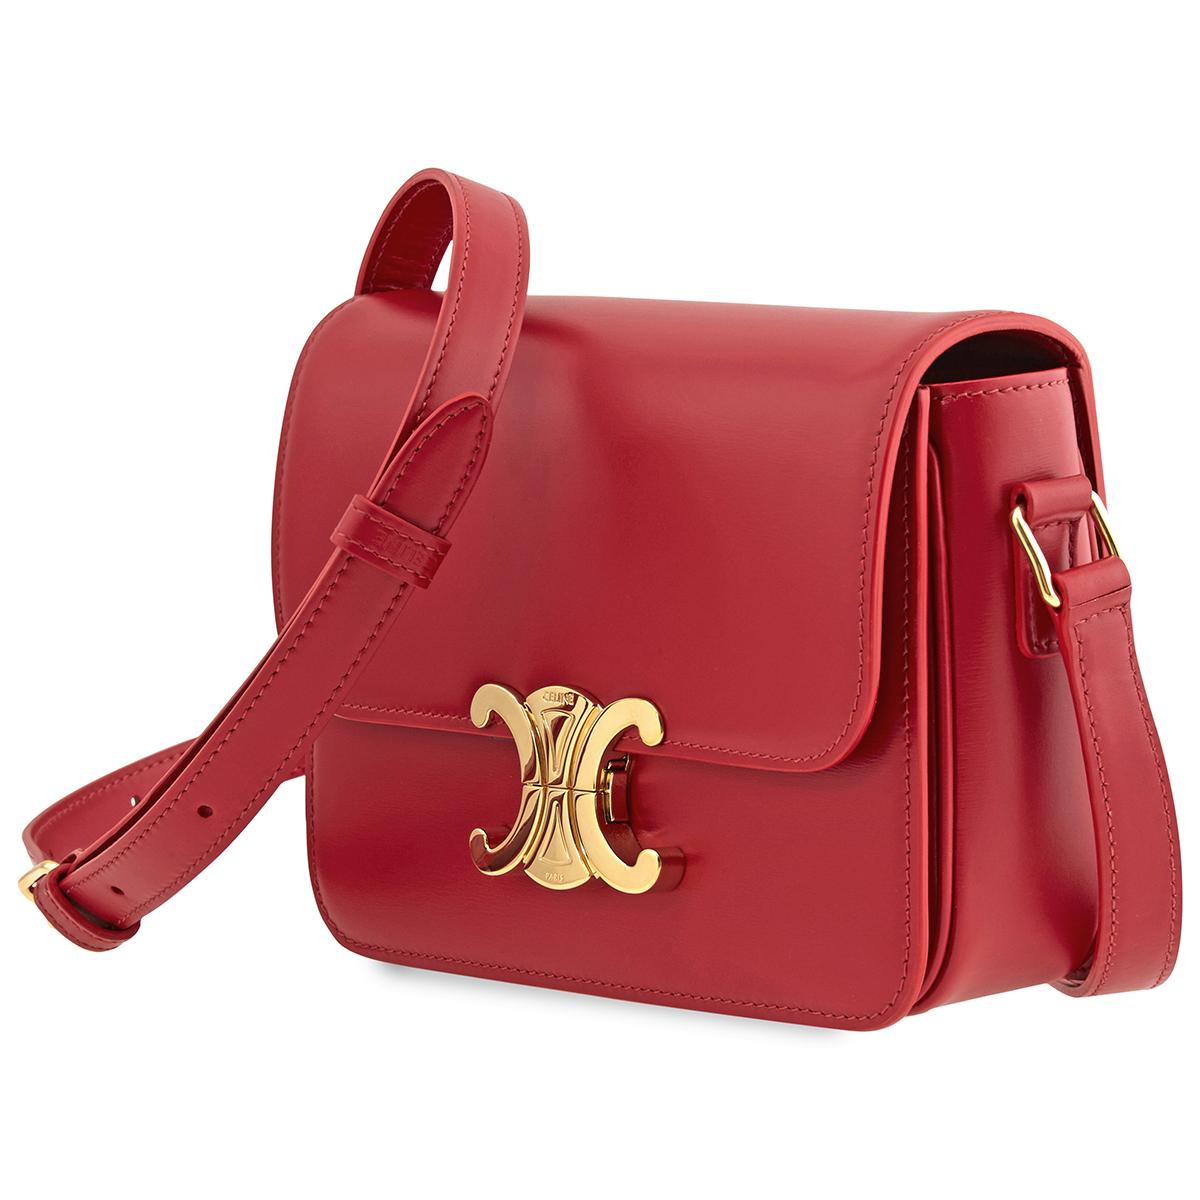 Celine Leather Open Box - Teen Triomphe Bag In Shiny Calfskin- Red 